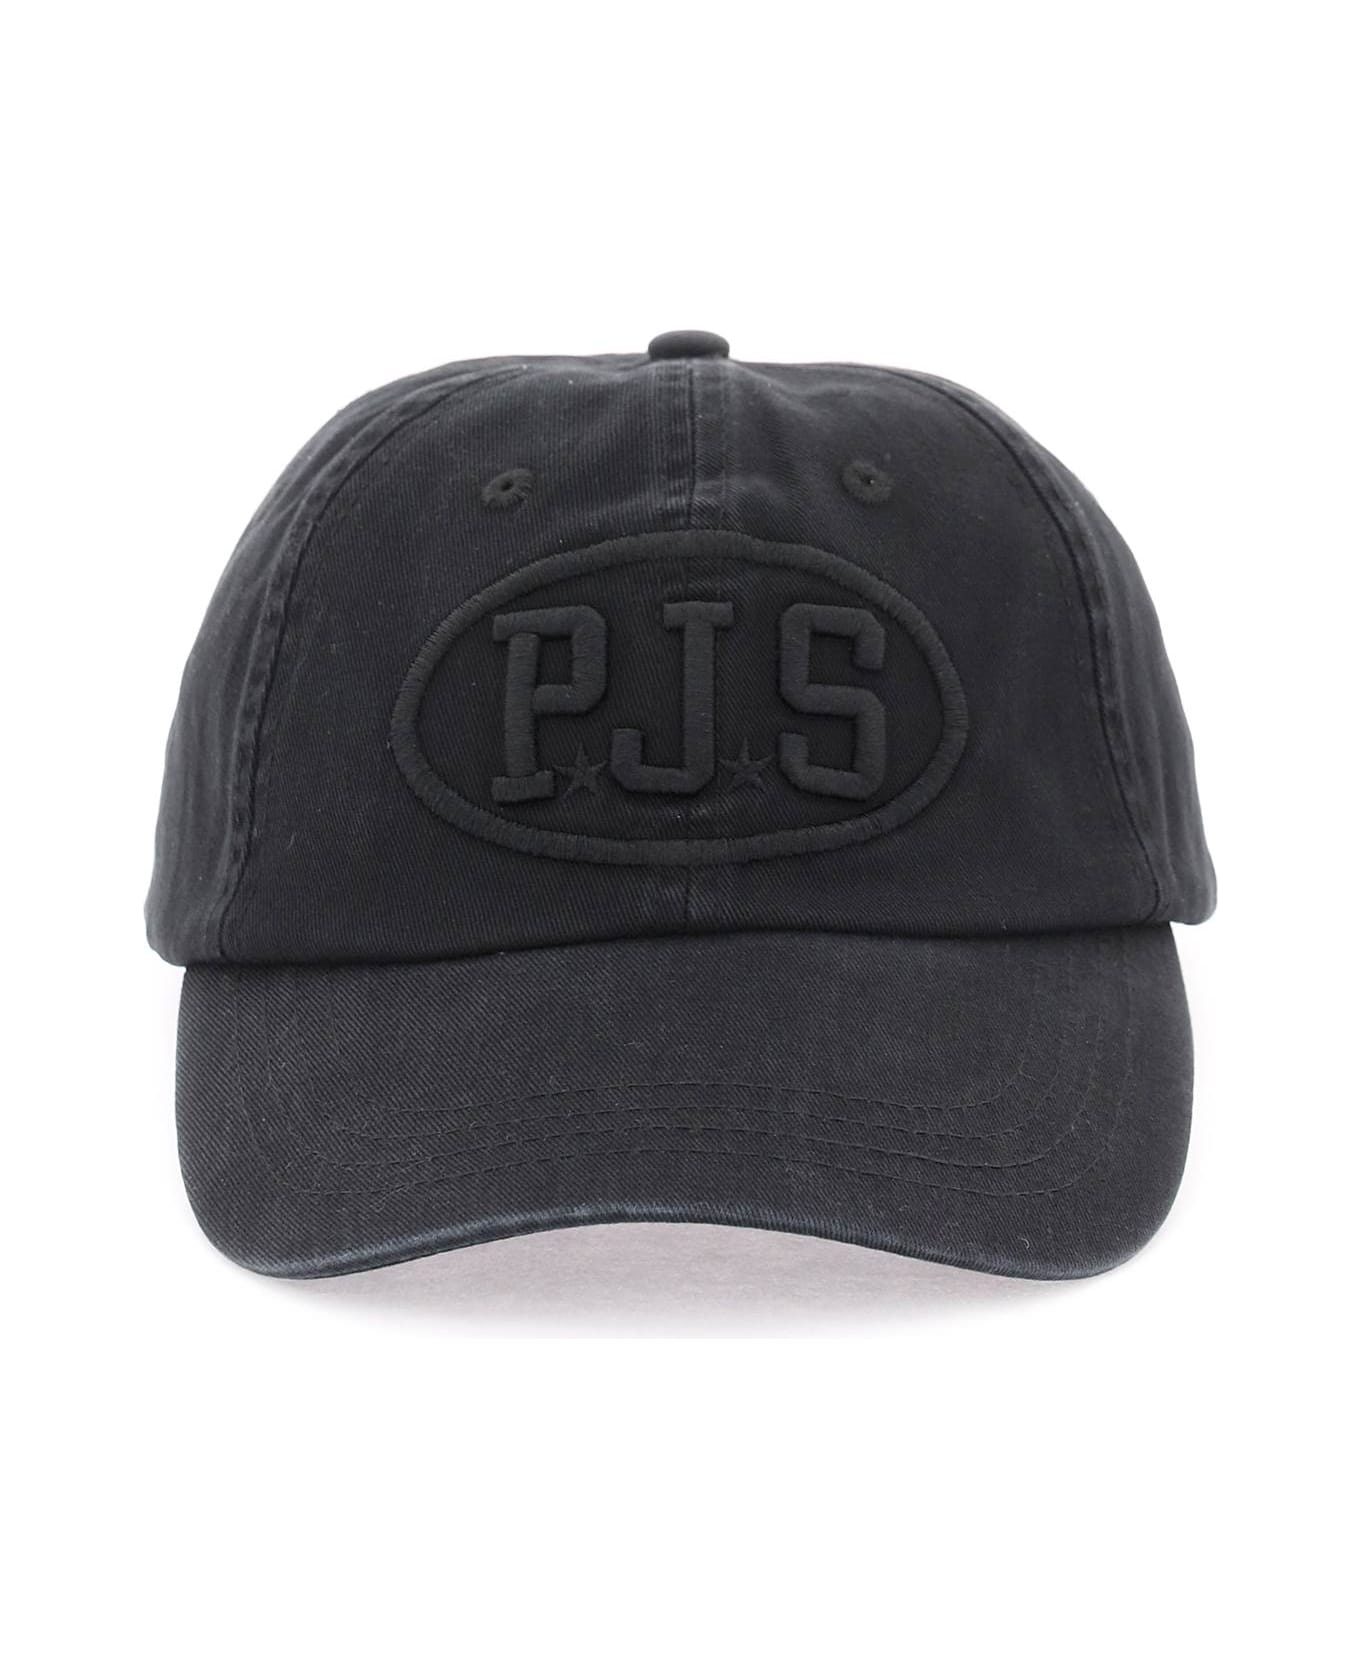 Parajumpers Baseball Cap With Embroidery - BLACK (Black)